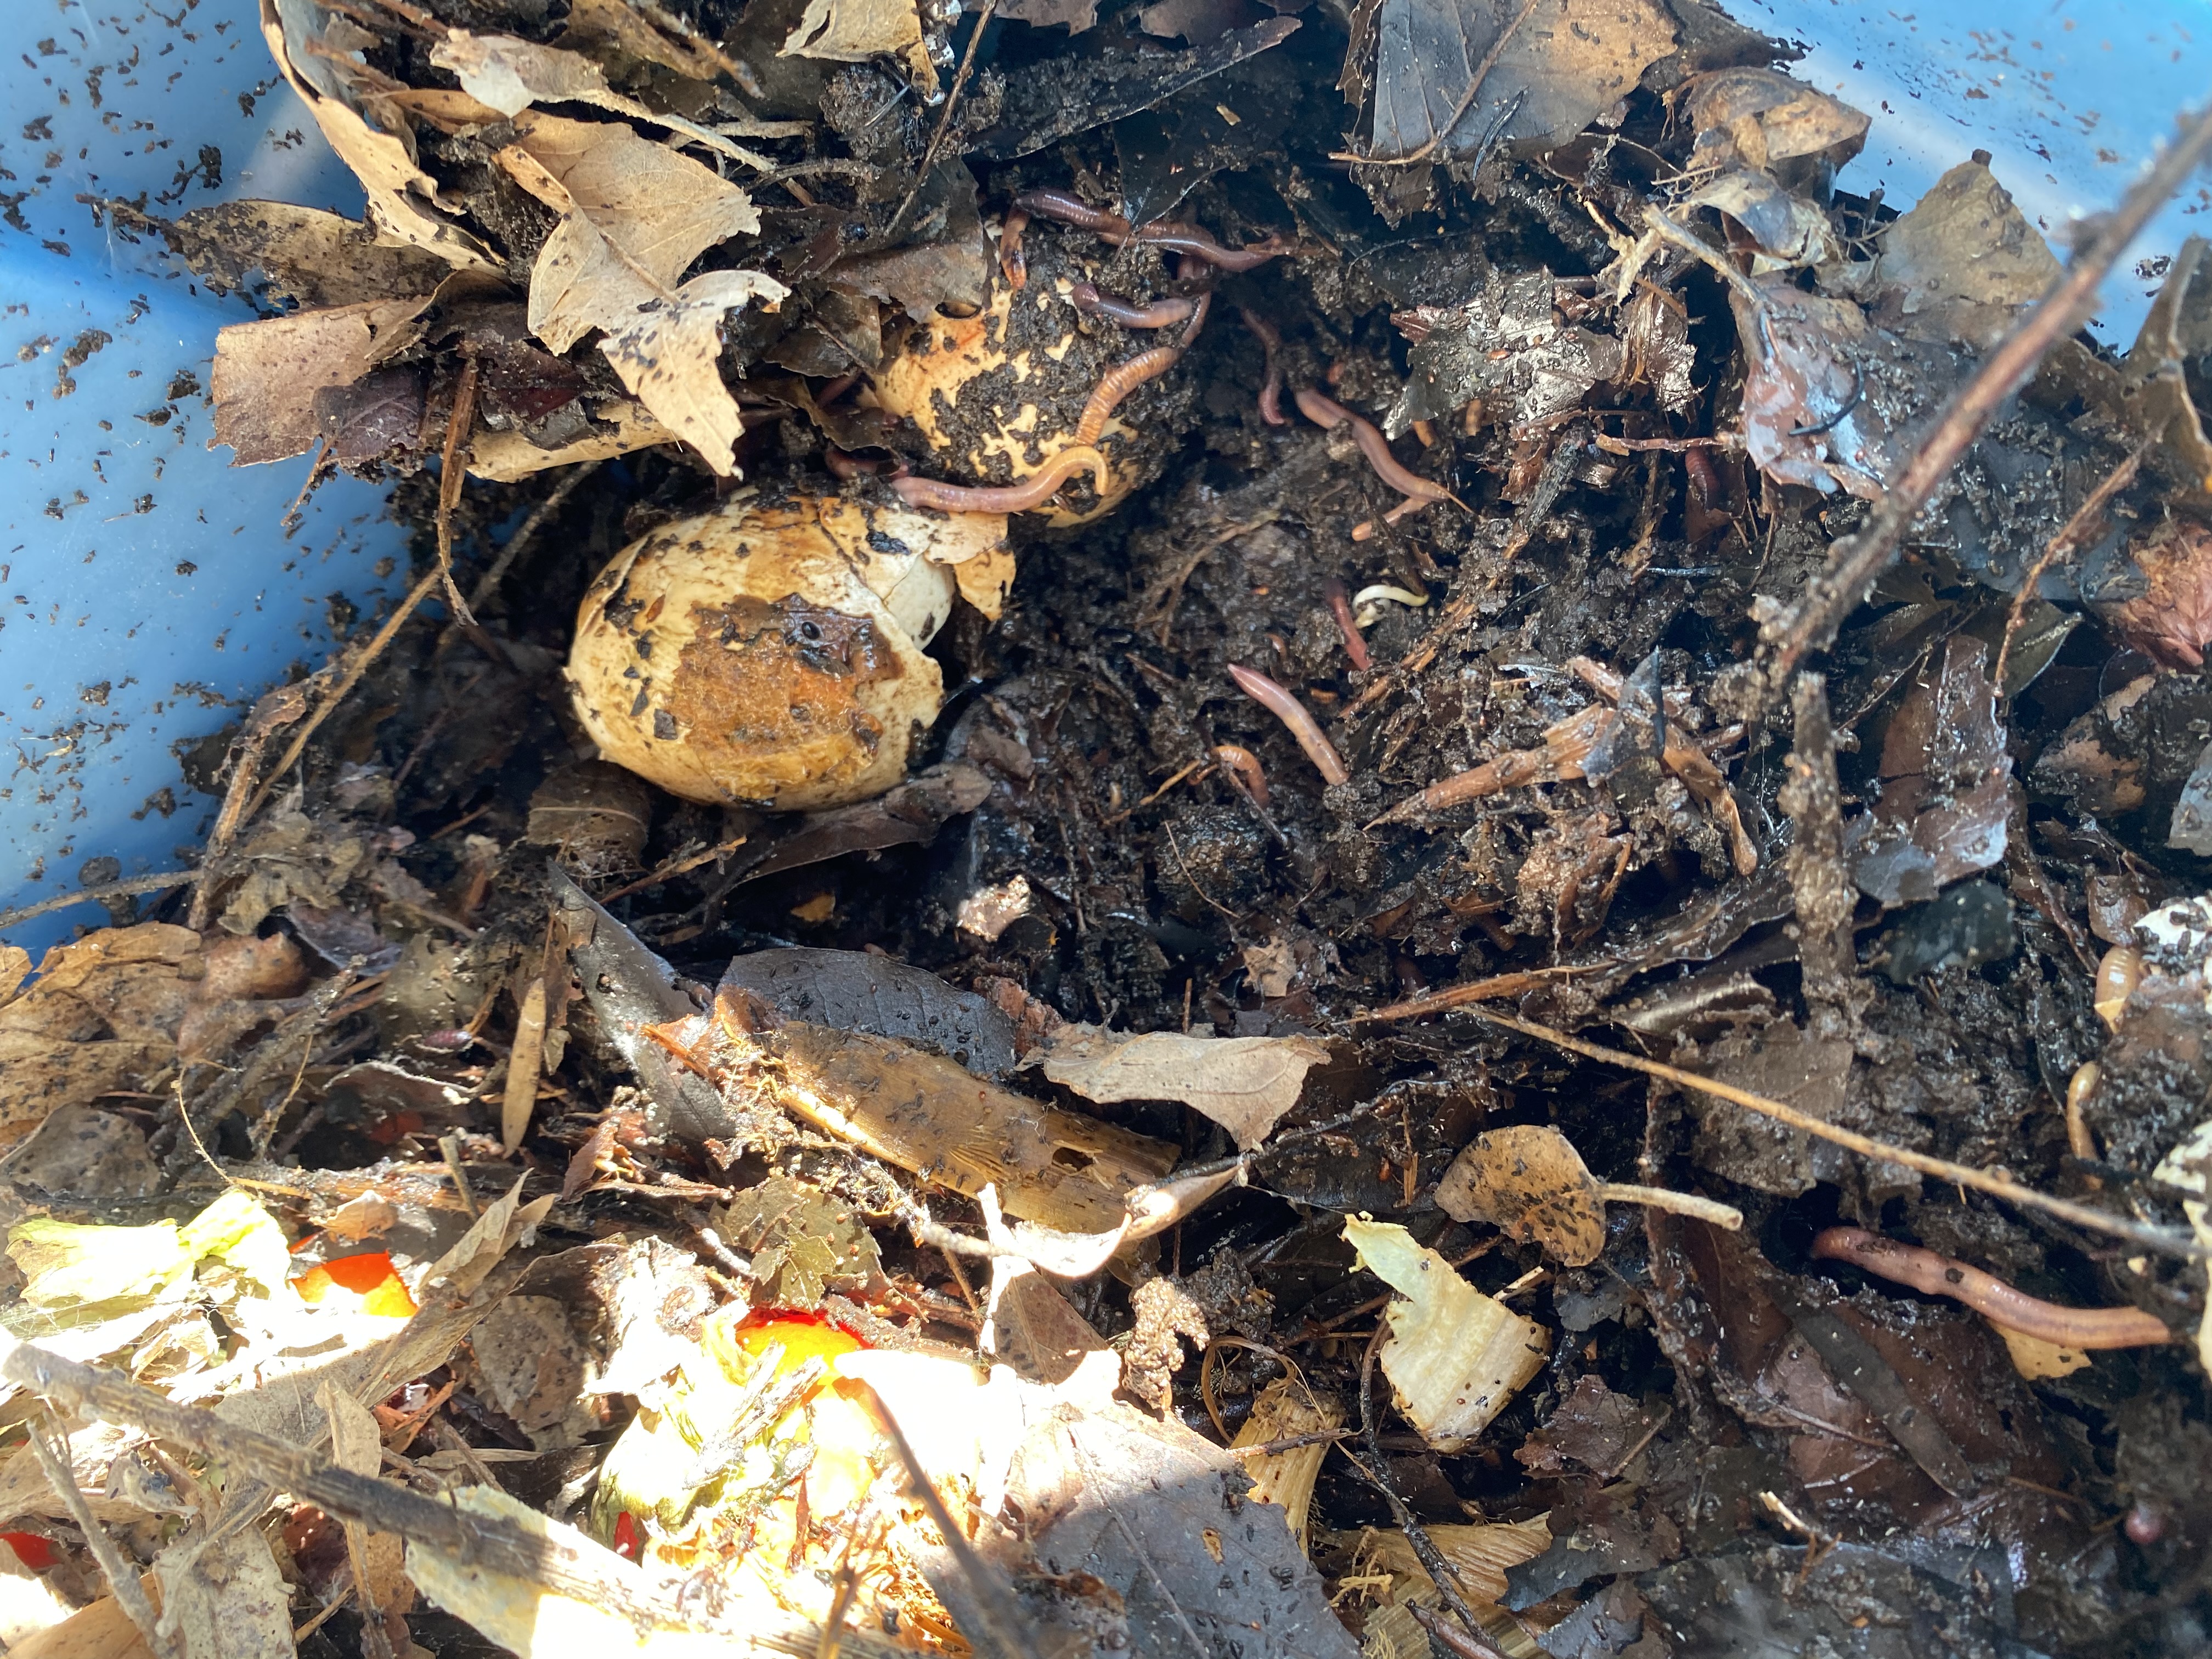 A compost pile with dead leaves and worms